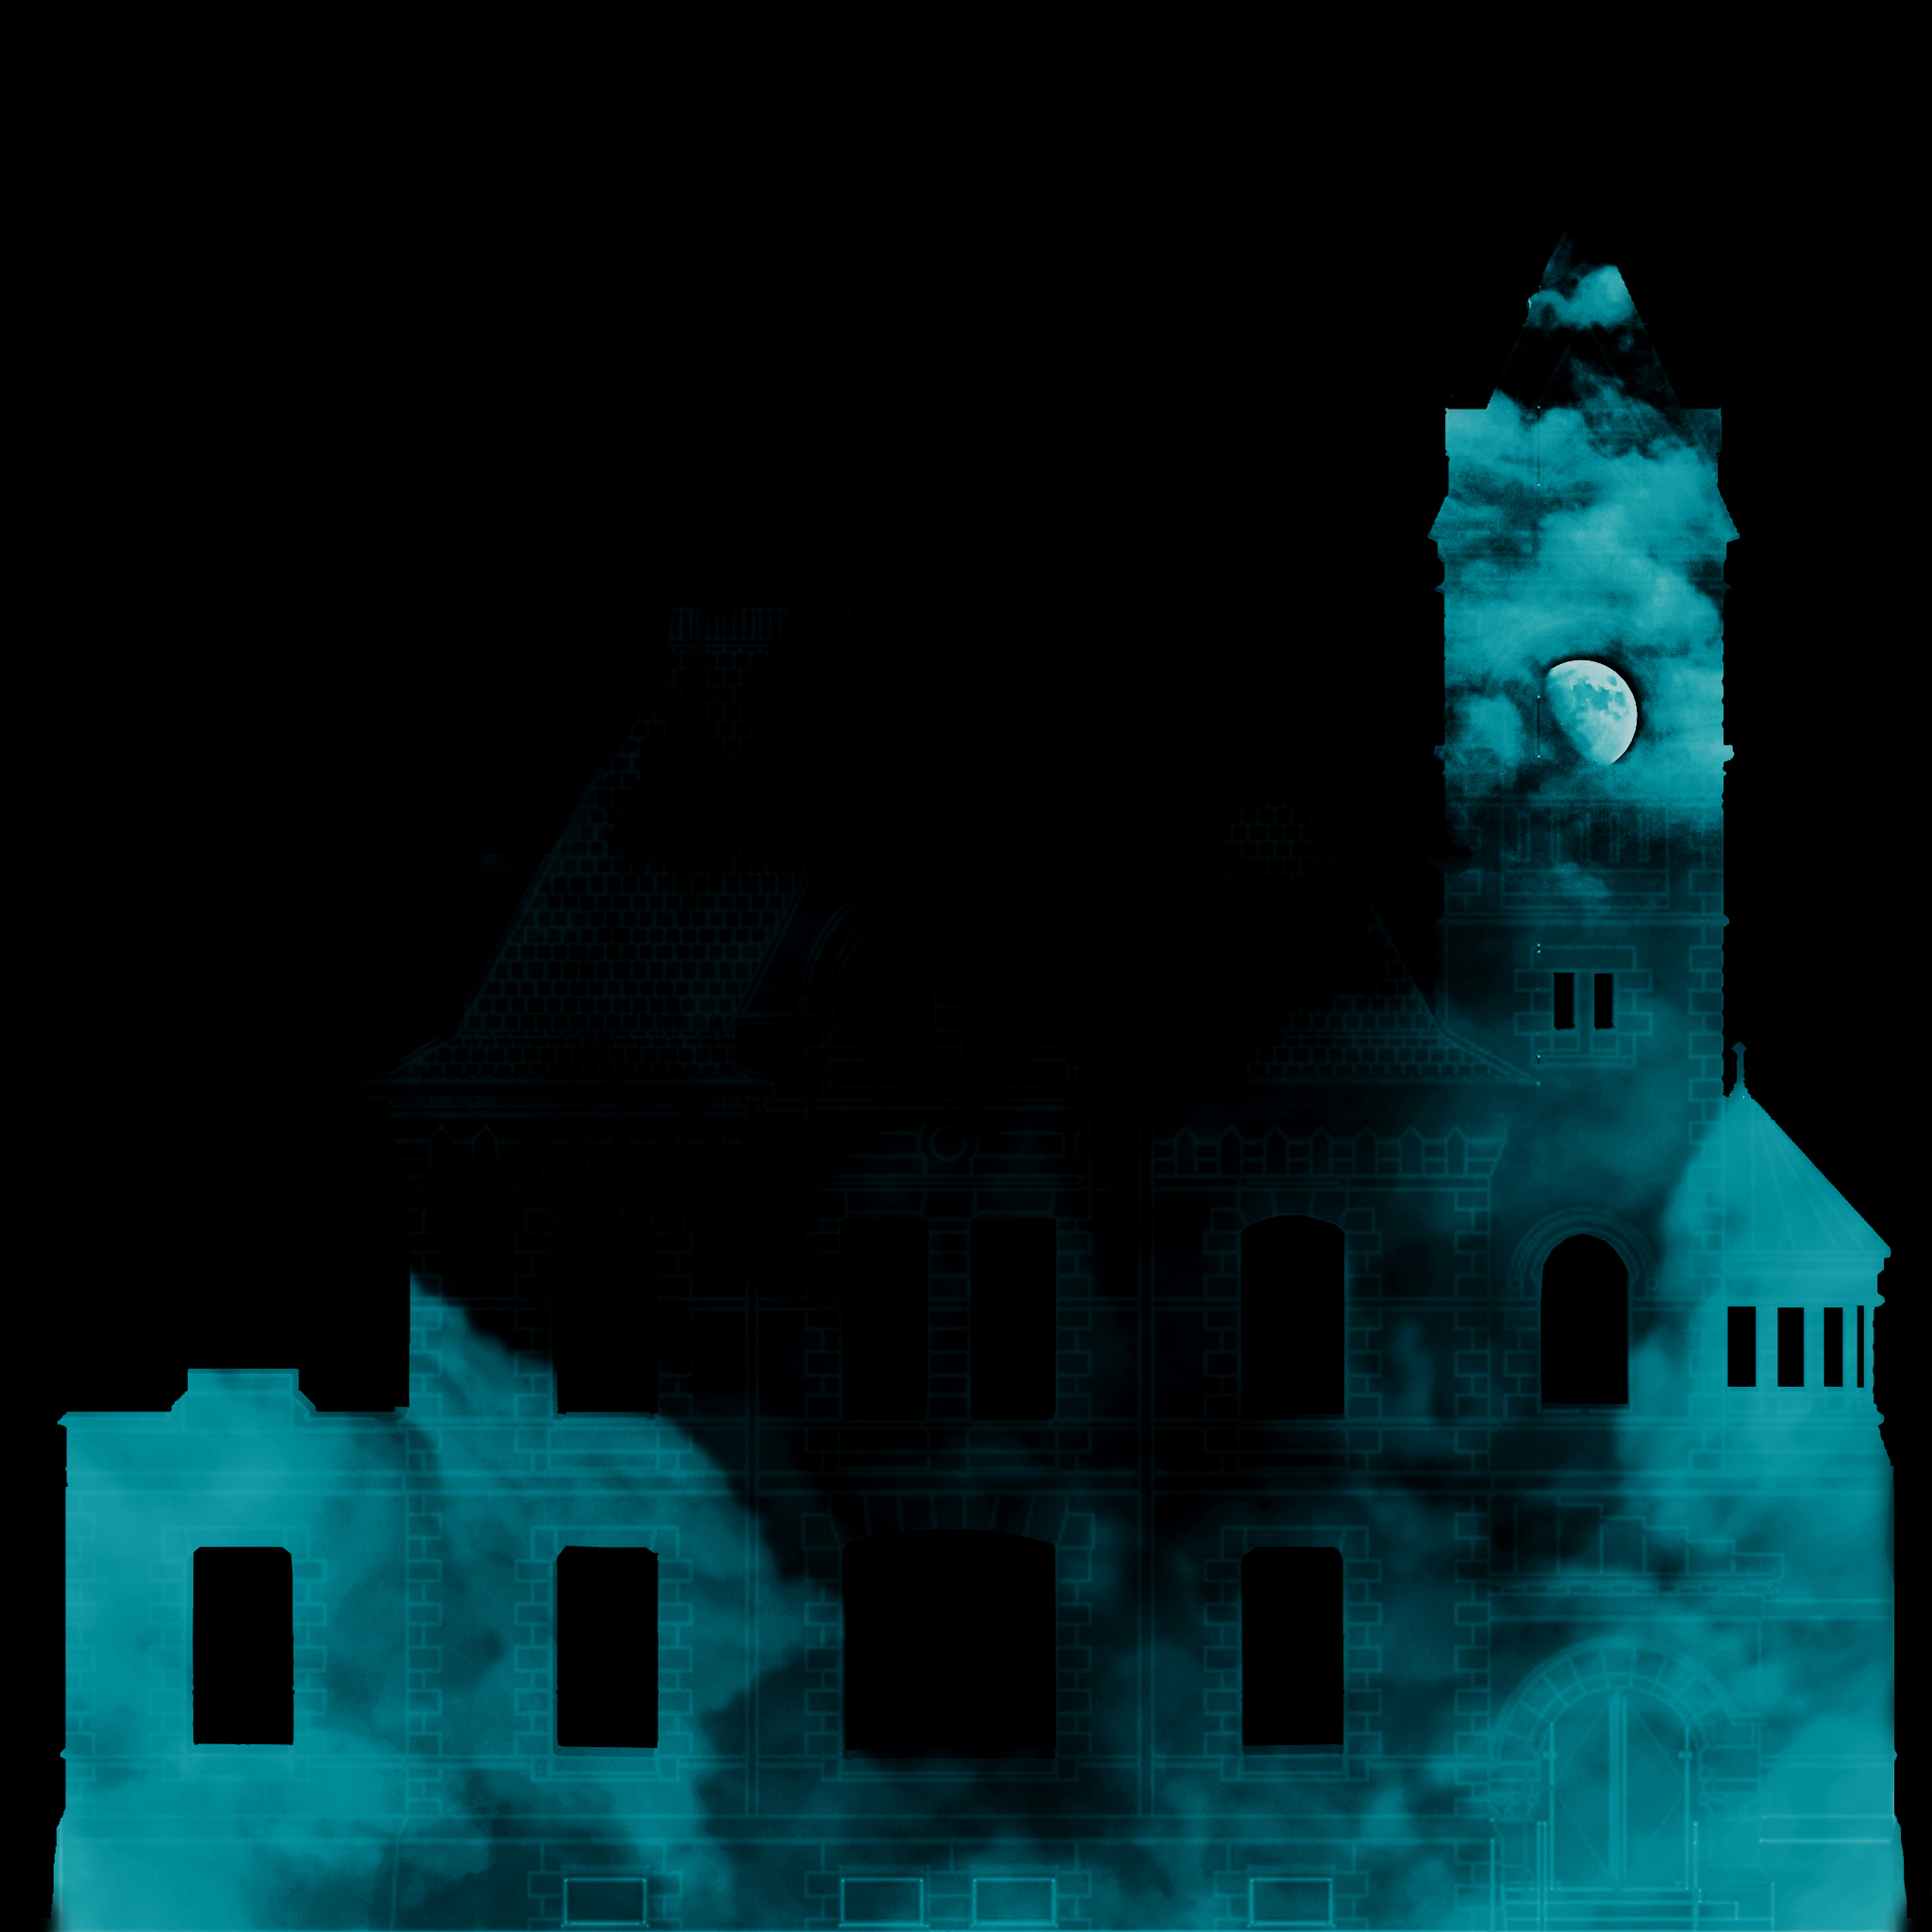 cloudy night sky projected on building